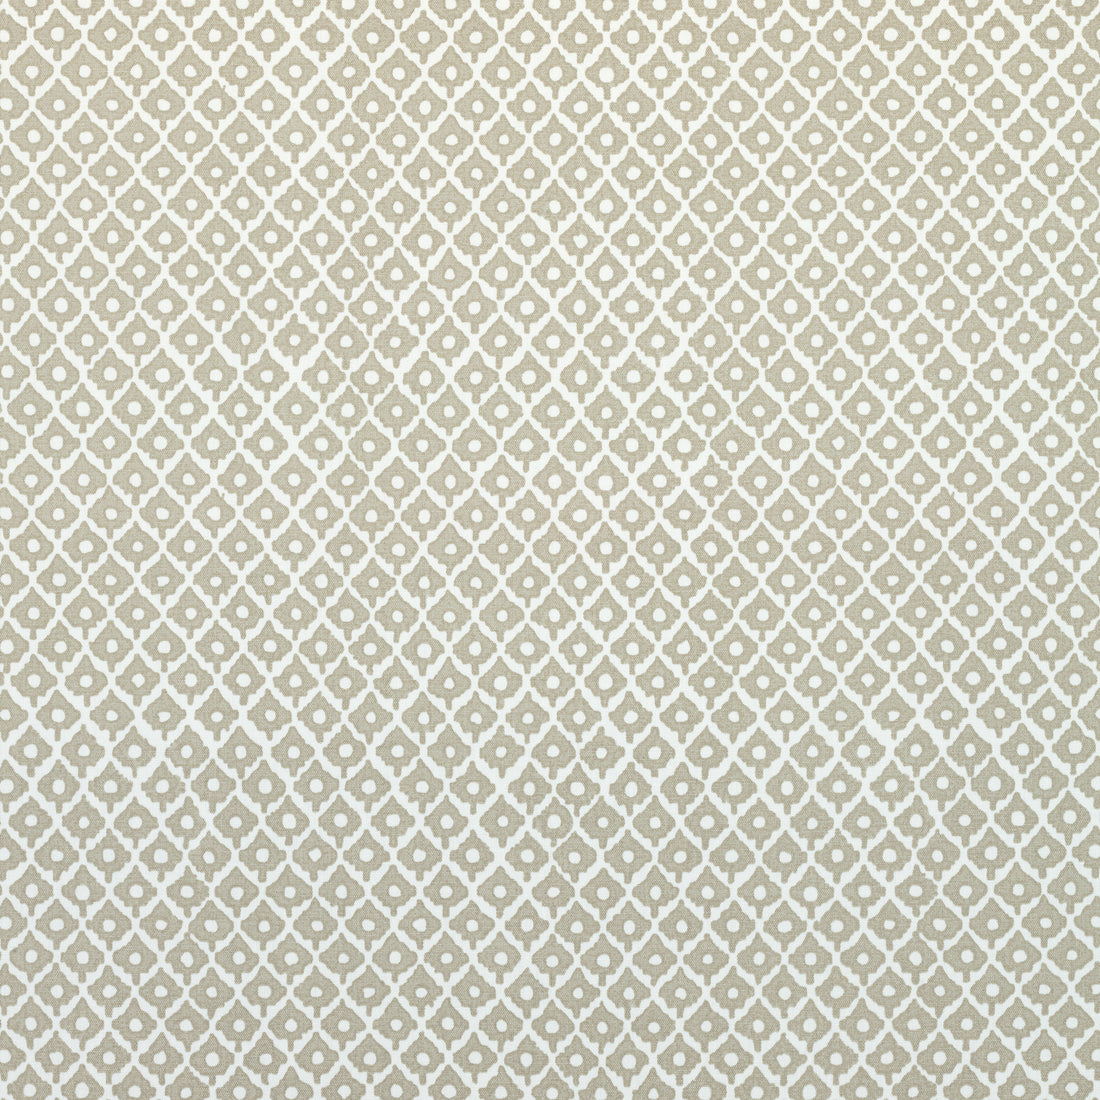 Petit Arbre fabric in flax on white  color - pattern number AF9633 - by Anna French in the Savoy collection